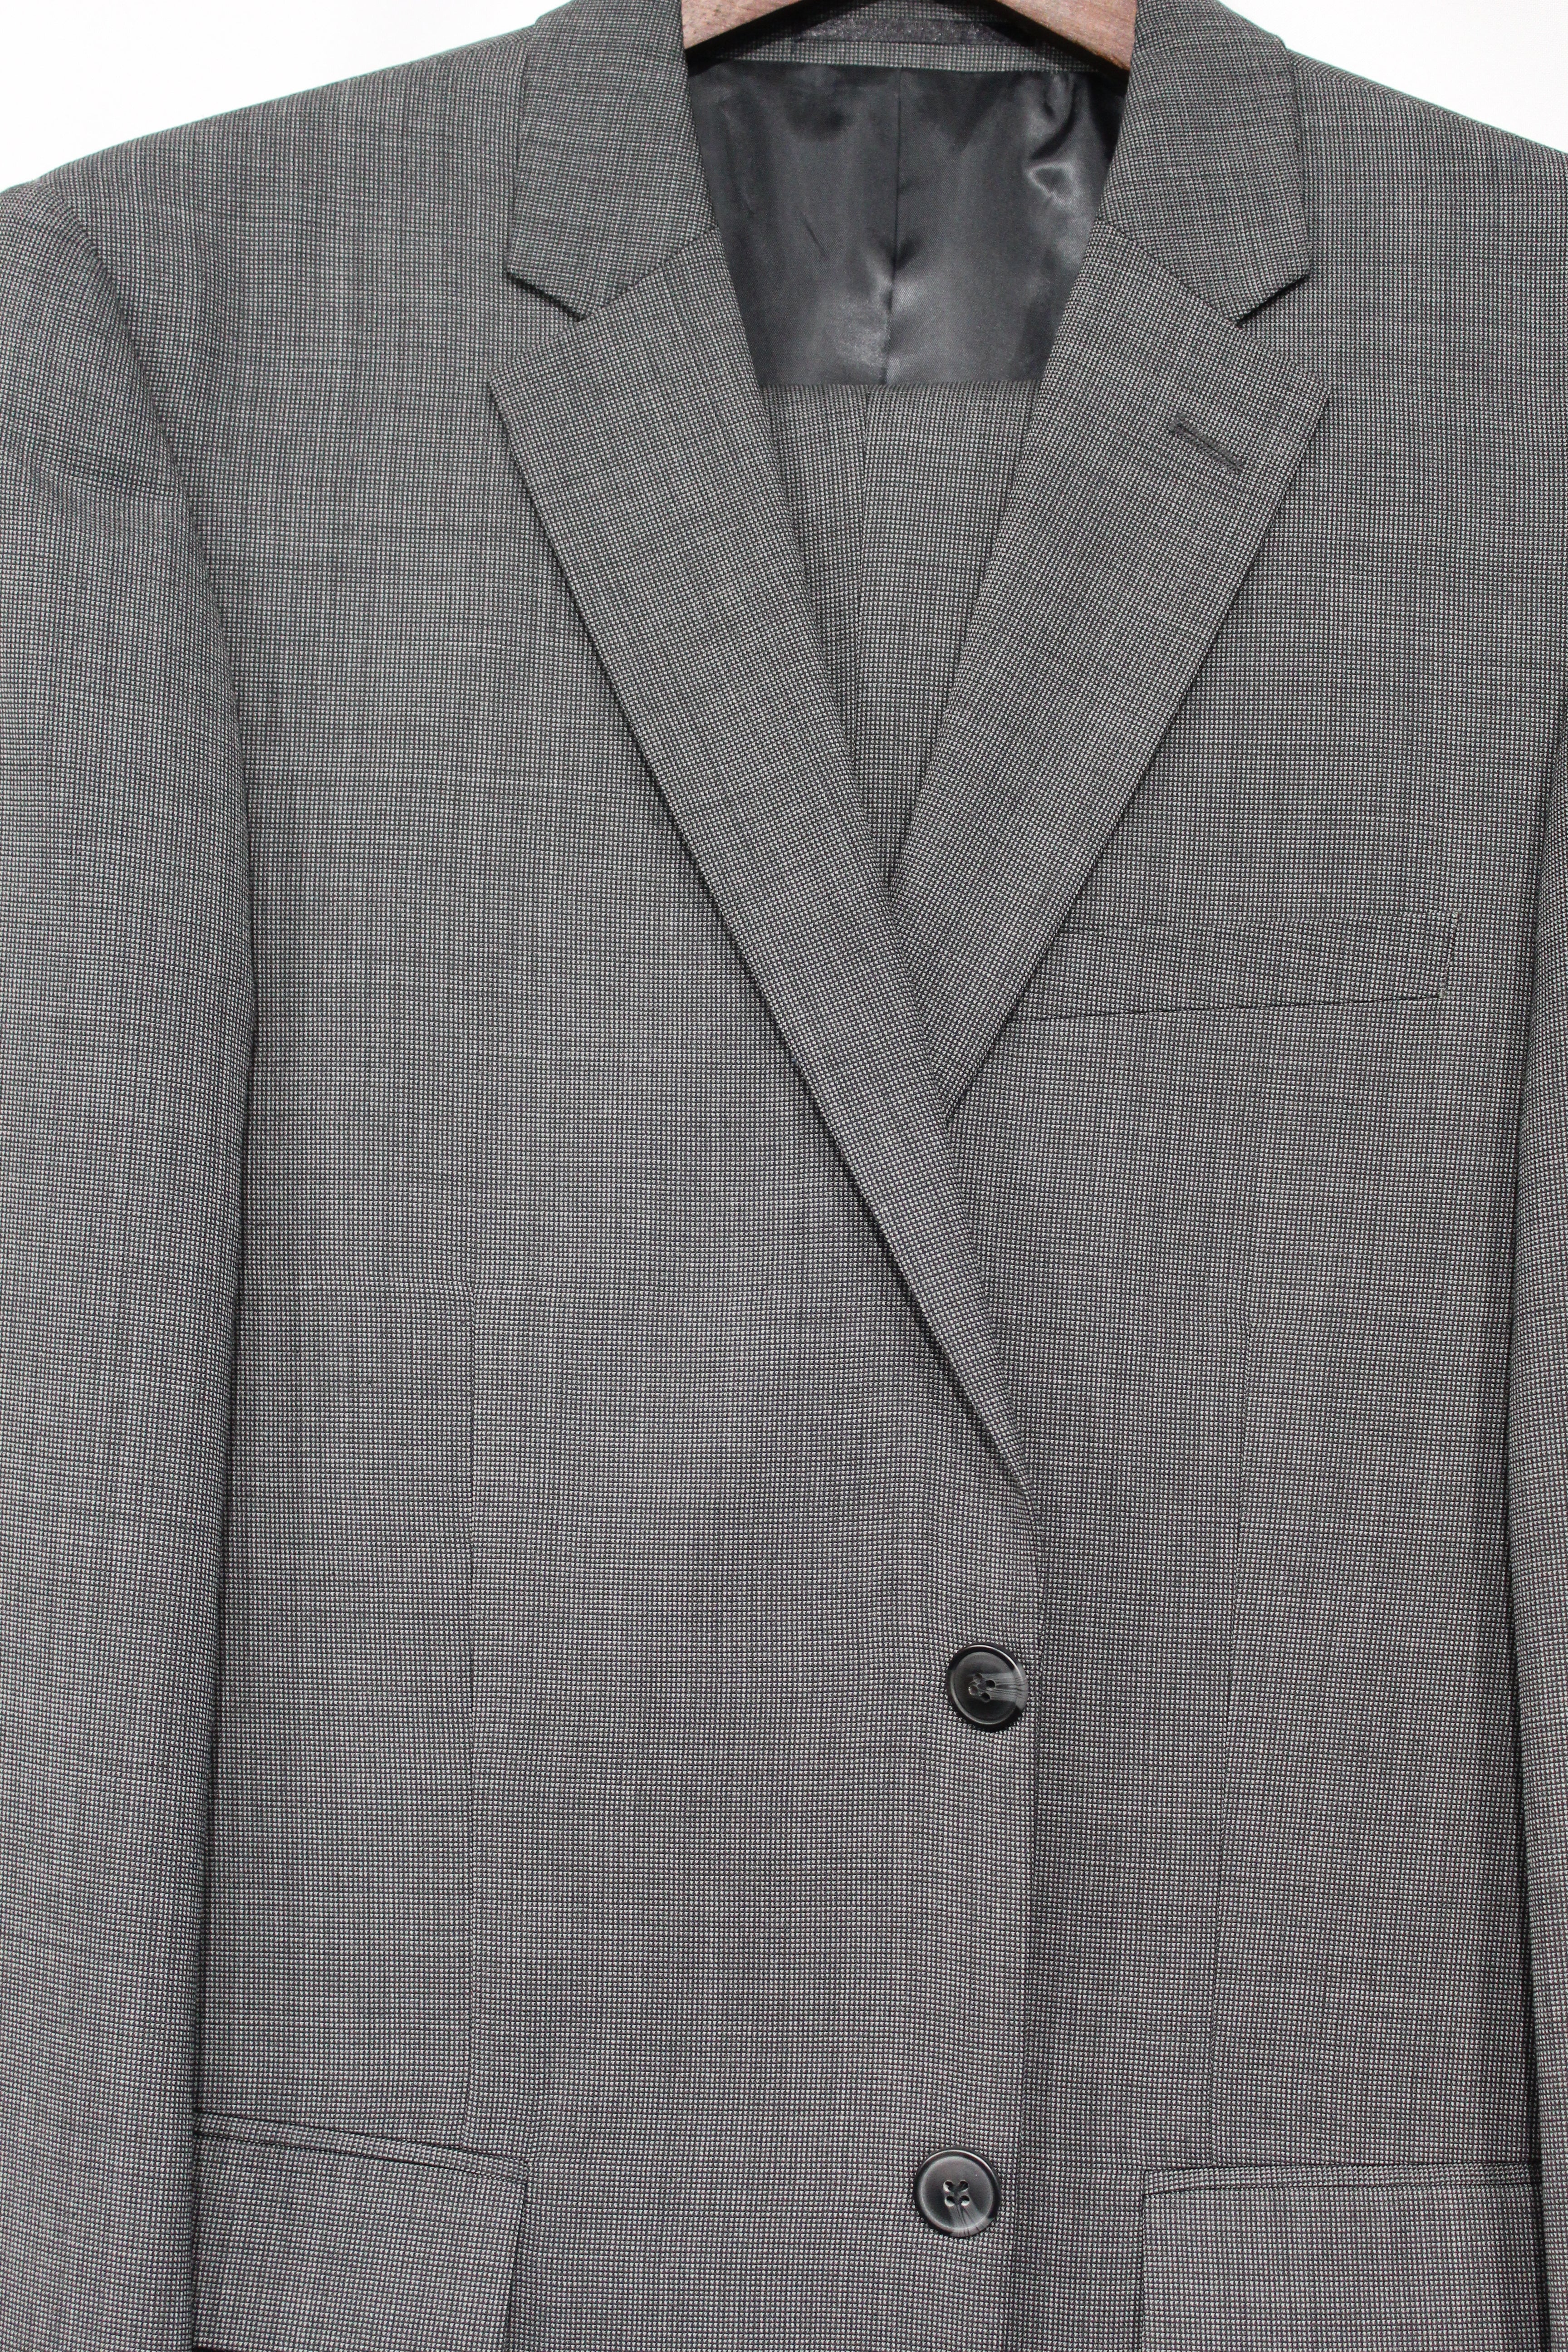 Grey Birdseye Suit For Men Wool Suits For All Ocassions MW115